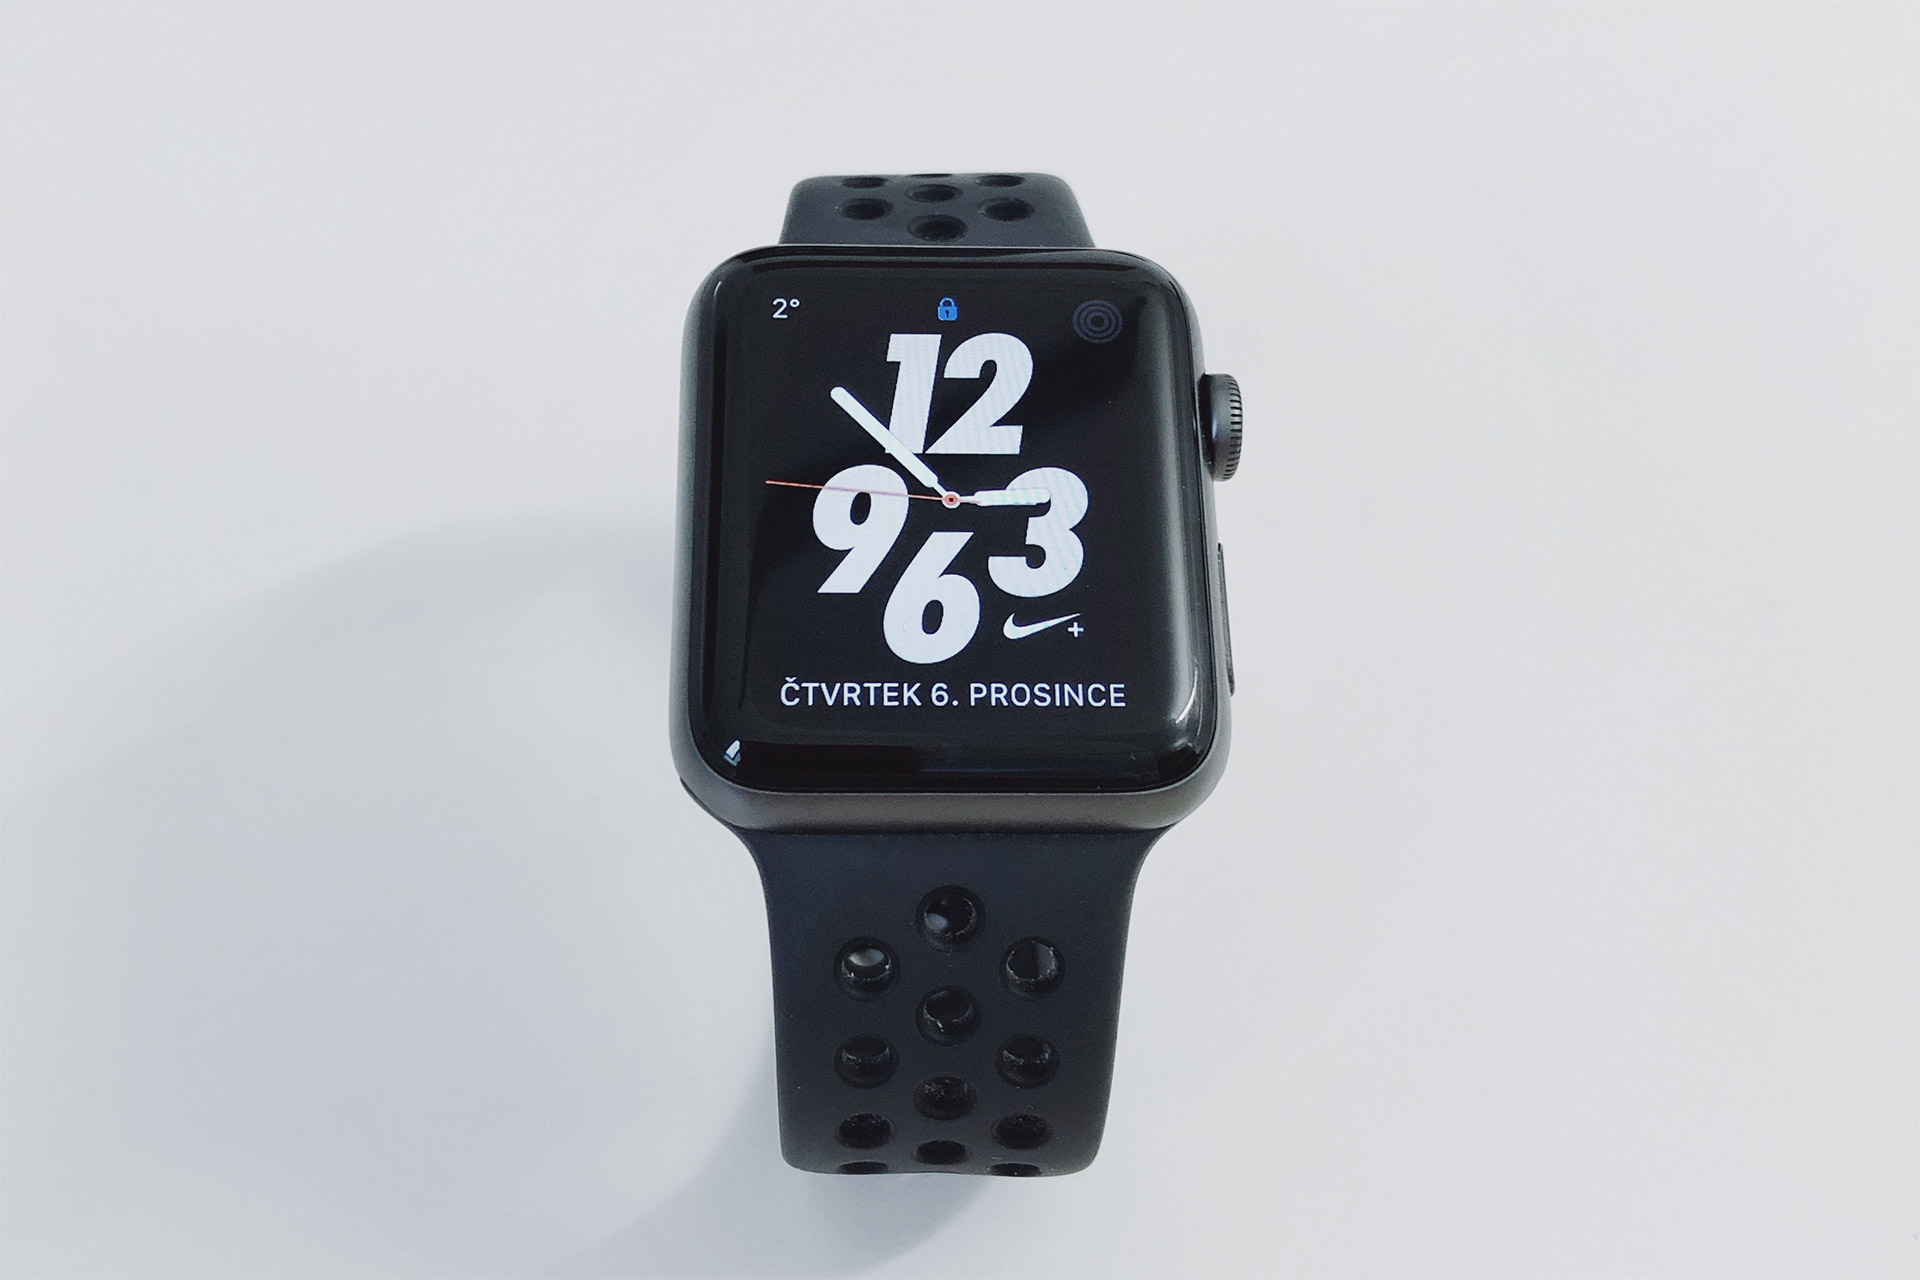 Testing Apple Watch half marathon battery life with cellular off: over 50% after 2 hours